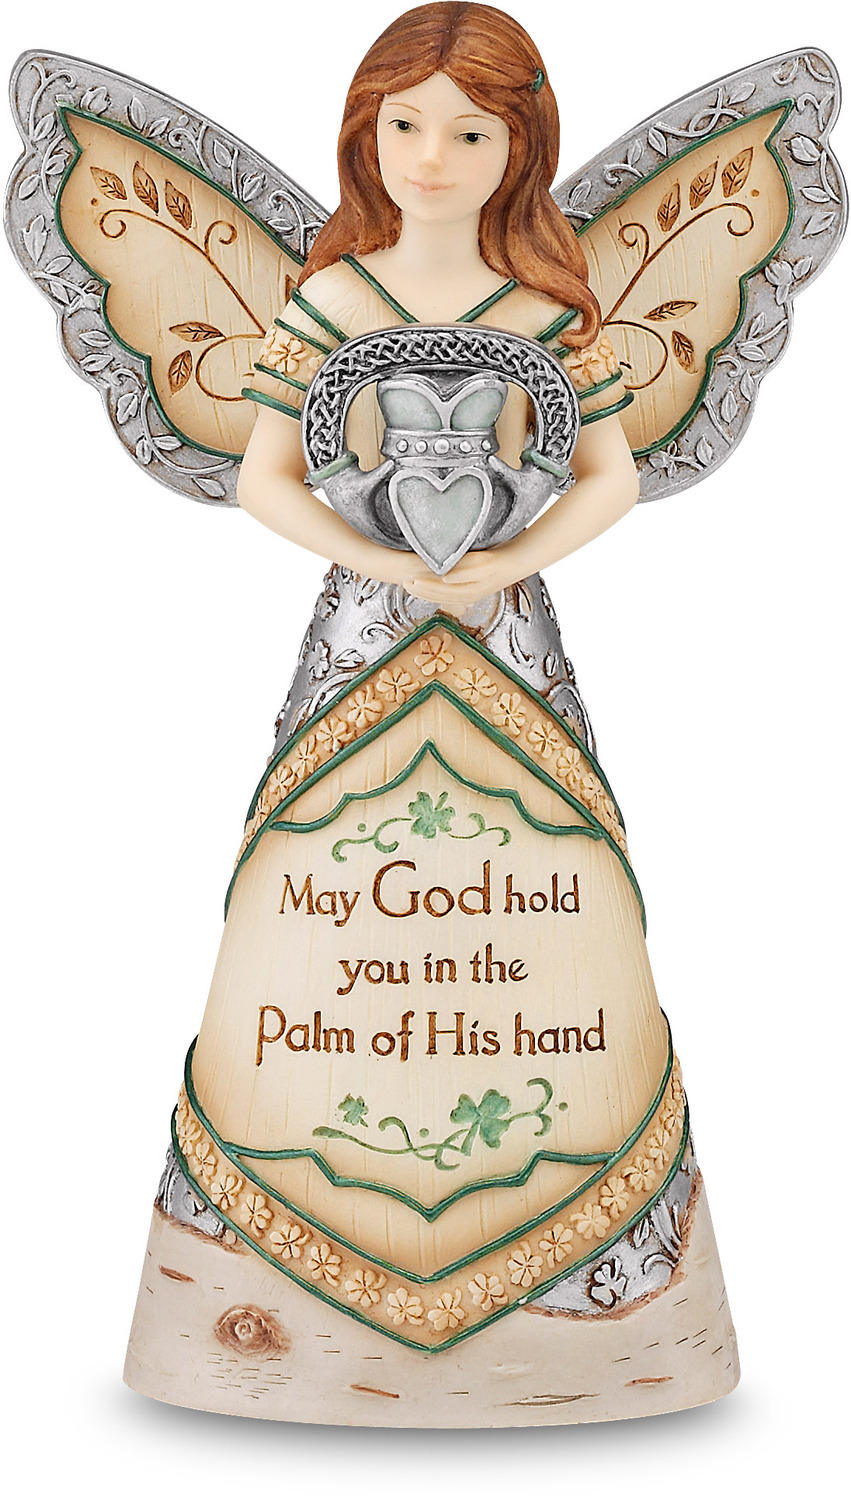 Irish Blessing by Elements - Irish Blessing - 6" Angel Holding Claddagh